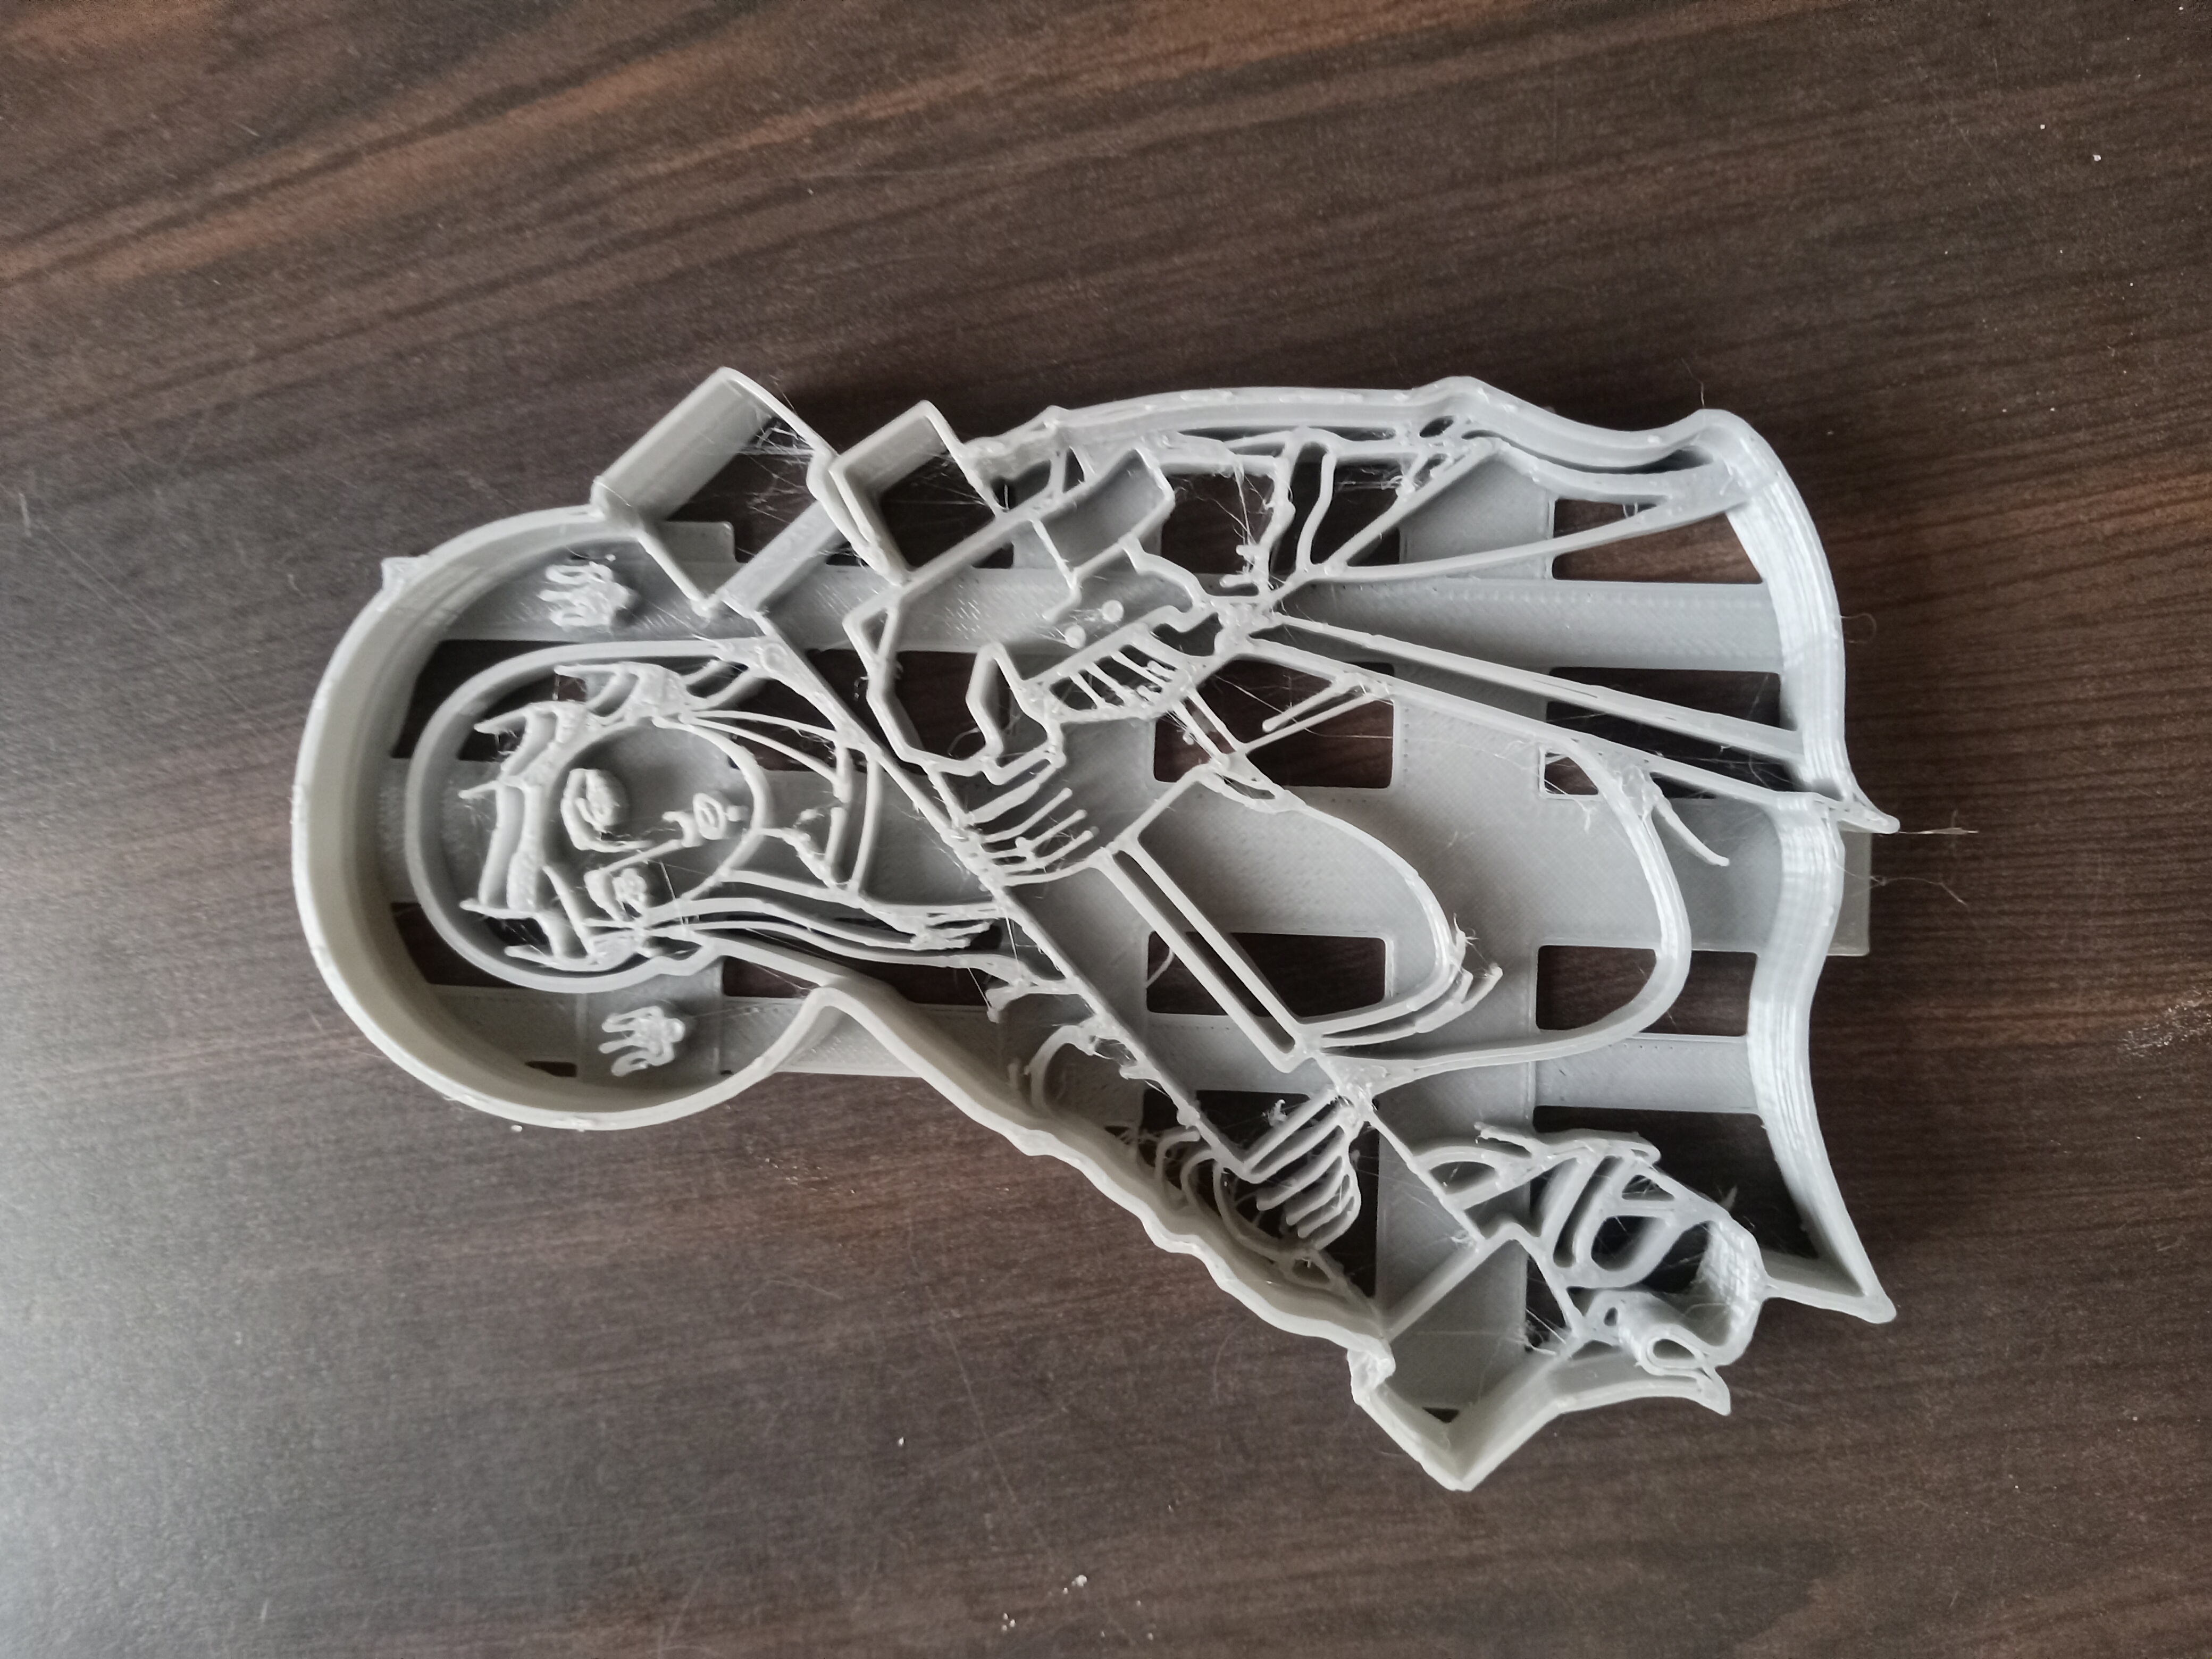 St Javelin Cookie Cutter.